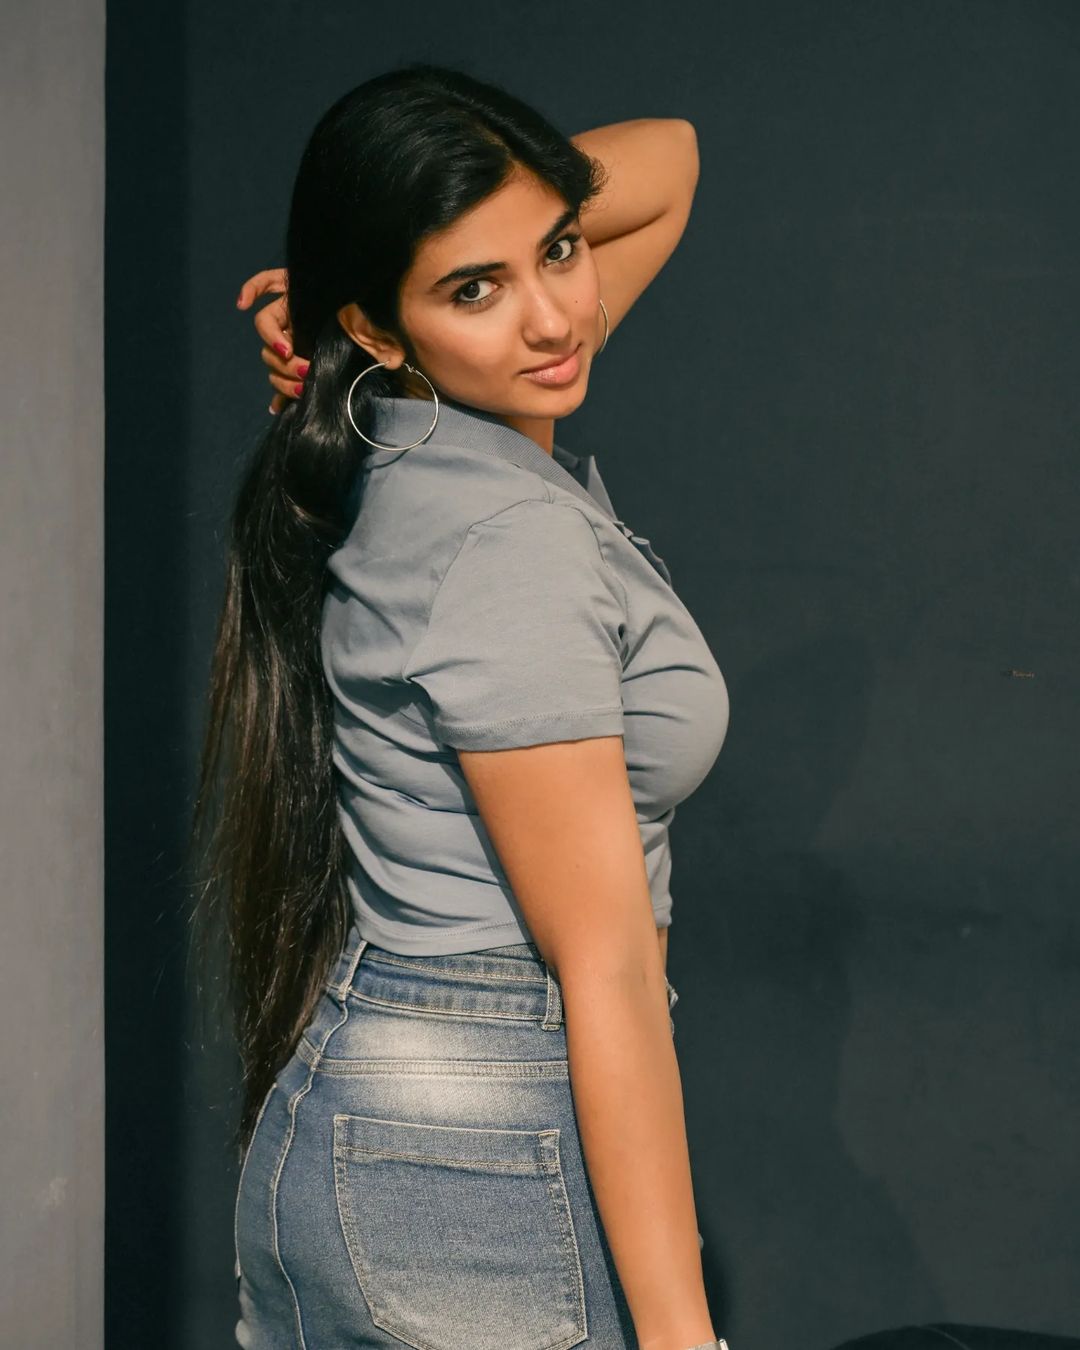 Pragya nagra sizzling with cute beauty-Actresspragya, Pragya Nagra, Pragyanagra Photos,Spicy Hot Pics,Images,High Resolution WallPapers Download